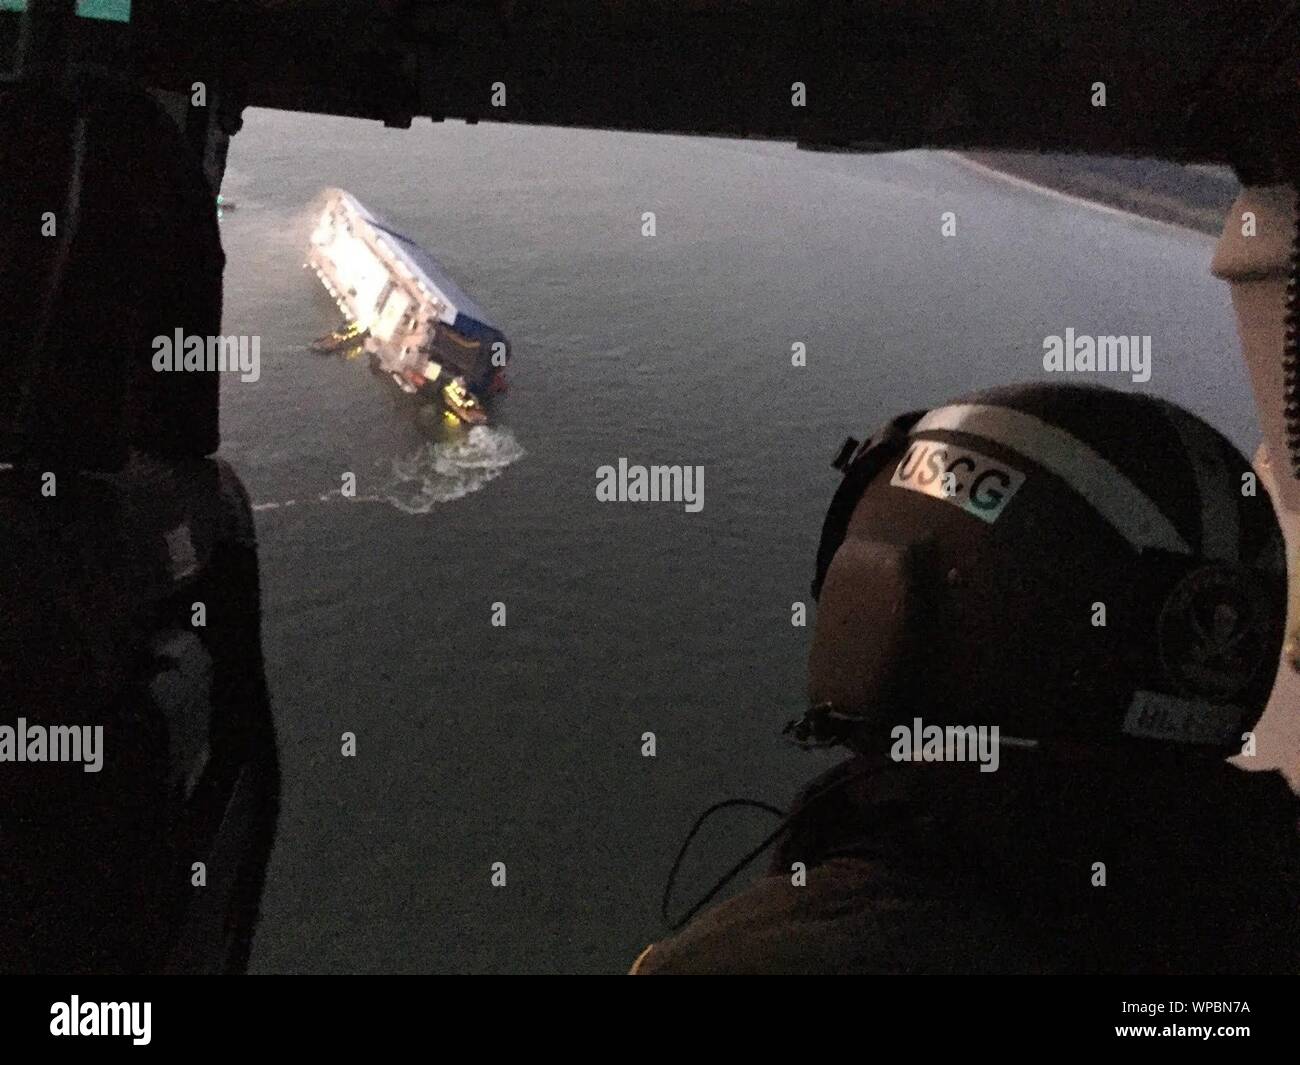 Coast Guard crews and port partners respond to a disabled cargo vessel with a fire on board September 8, 2019, in St. Simons Sound, Georgia. At approximately 2 a.m., Coast Guard Sector Charleston watch standers were notified of the M/V GOLDEN RAY, a 656’ vehicle carrier, listing heavily in the St. Simons Sound with a total of 24 people on board; including 23 crew members and 1 pilot. (U.S. Coast Guard photo) Stock Photo